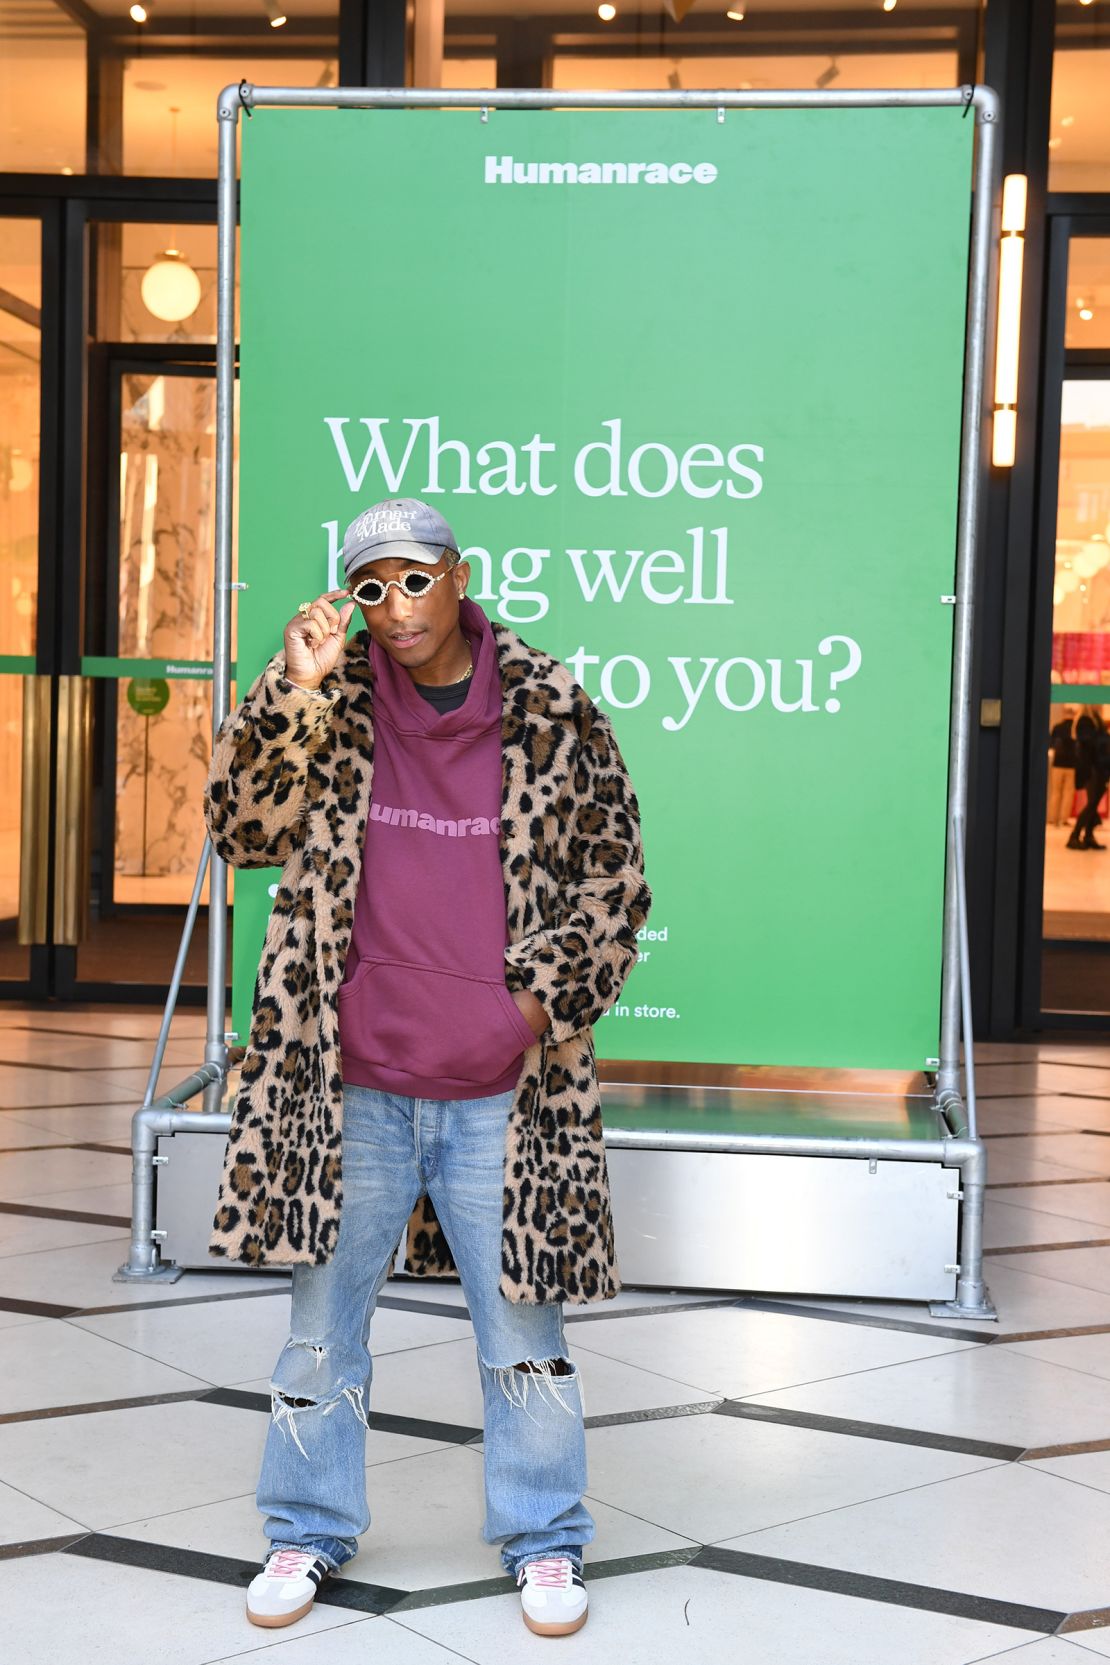 After a year of primarily online sales, Pharrell Williams brought Humanrace's award-winning products to Selfridges in the UK.